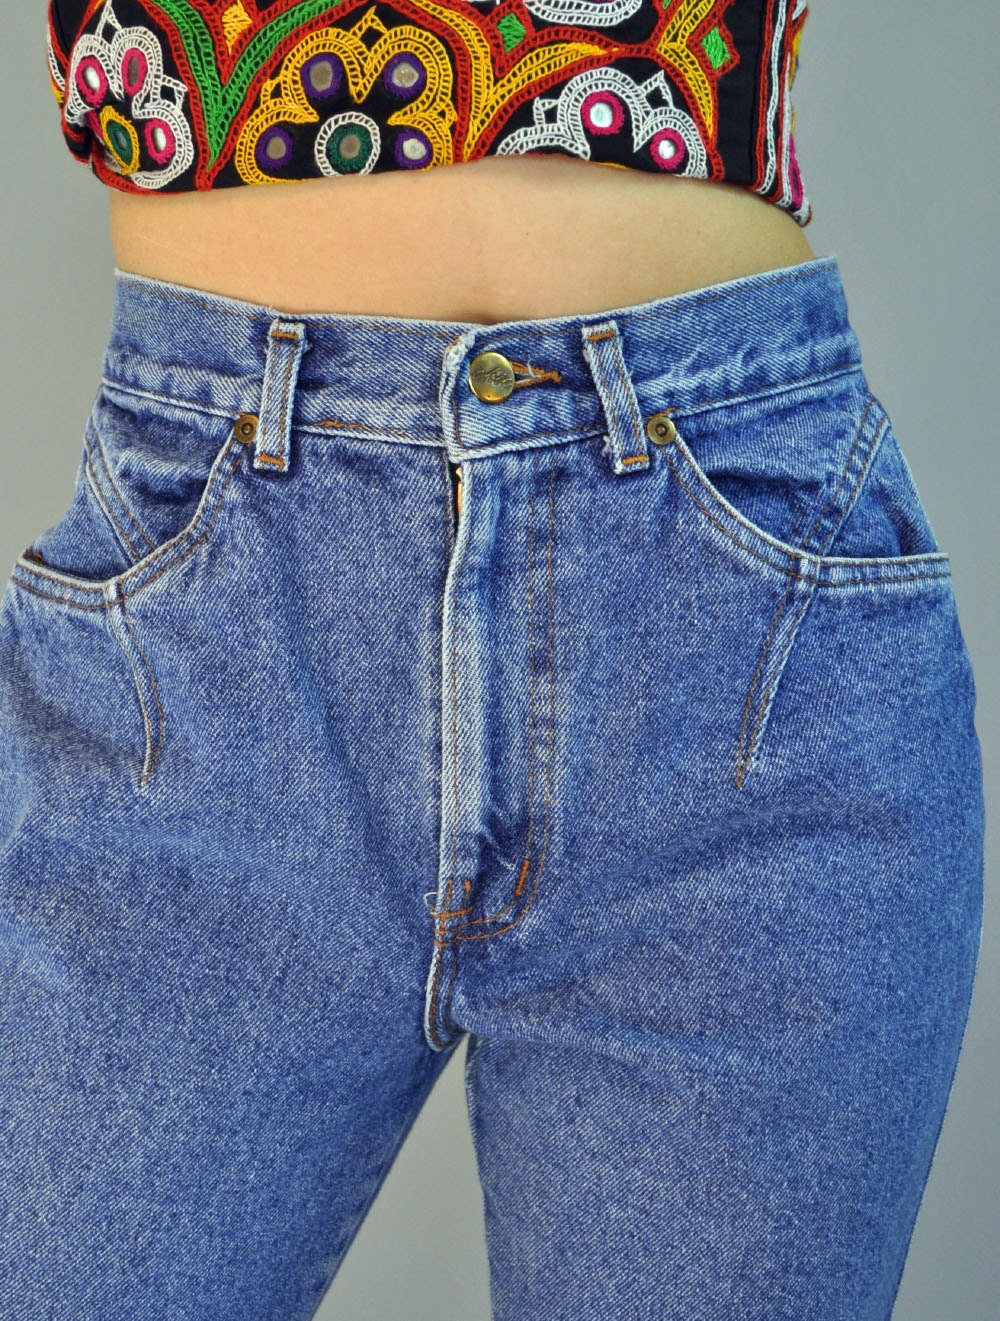 vintage 80s High Waisted Jeans / CHIC Vintage Blue Jeans